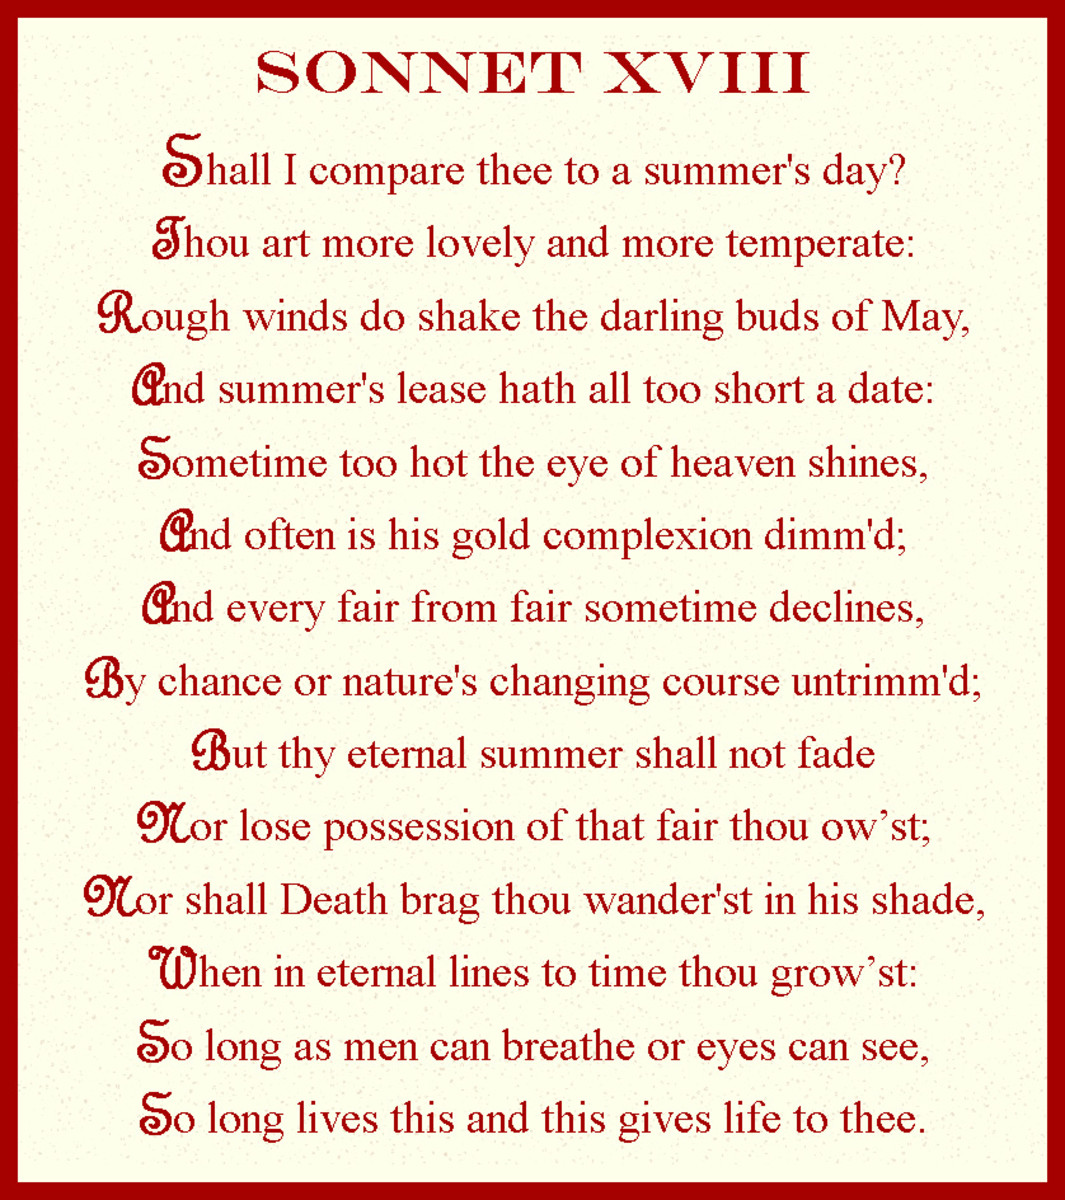 shakespeares-sonnets-online-sonnet-18-shall-i-compare-thee-to-a-summers-day